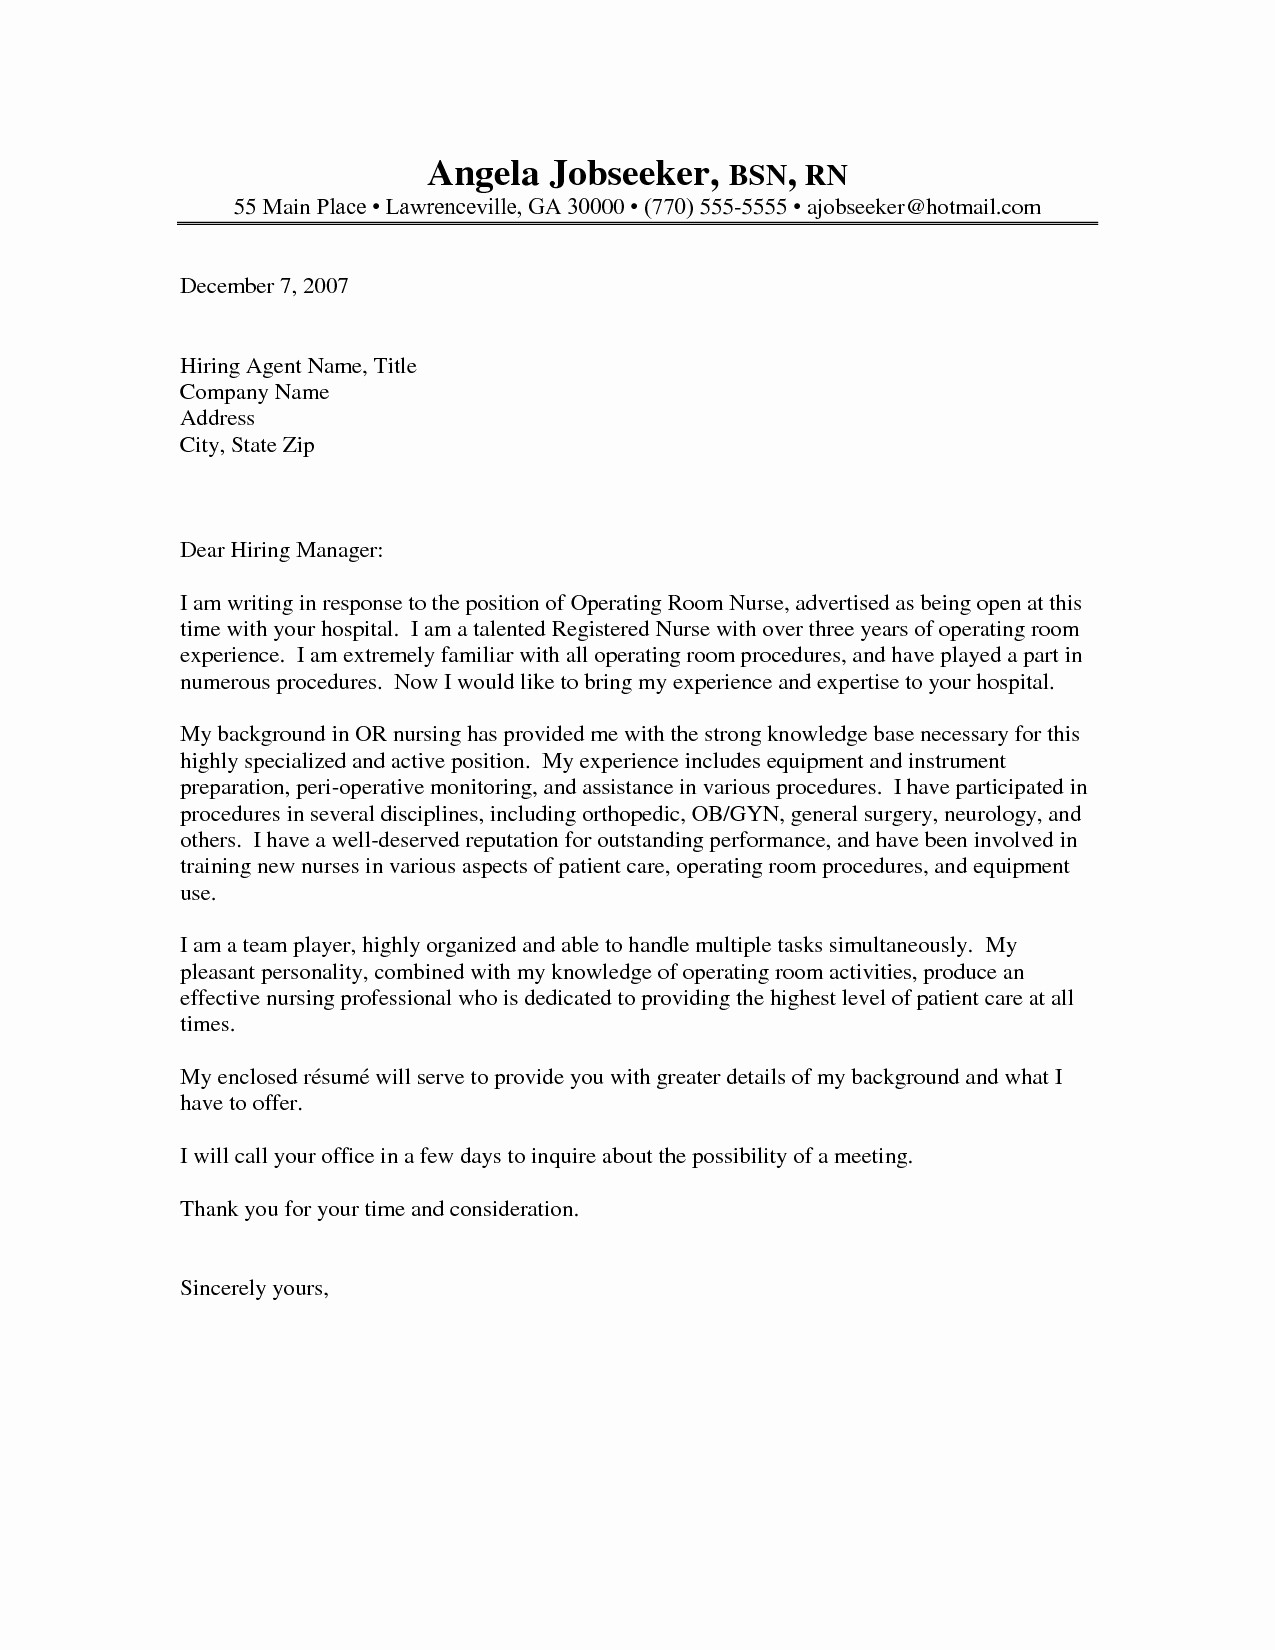 Resume and Cover Letter Templates New Good Cover Letter Examples